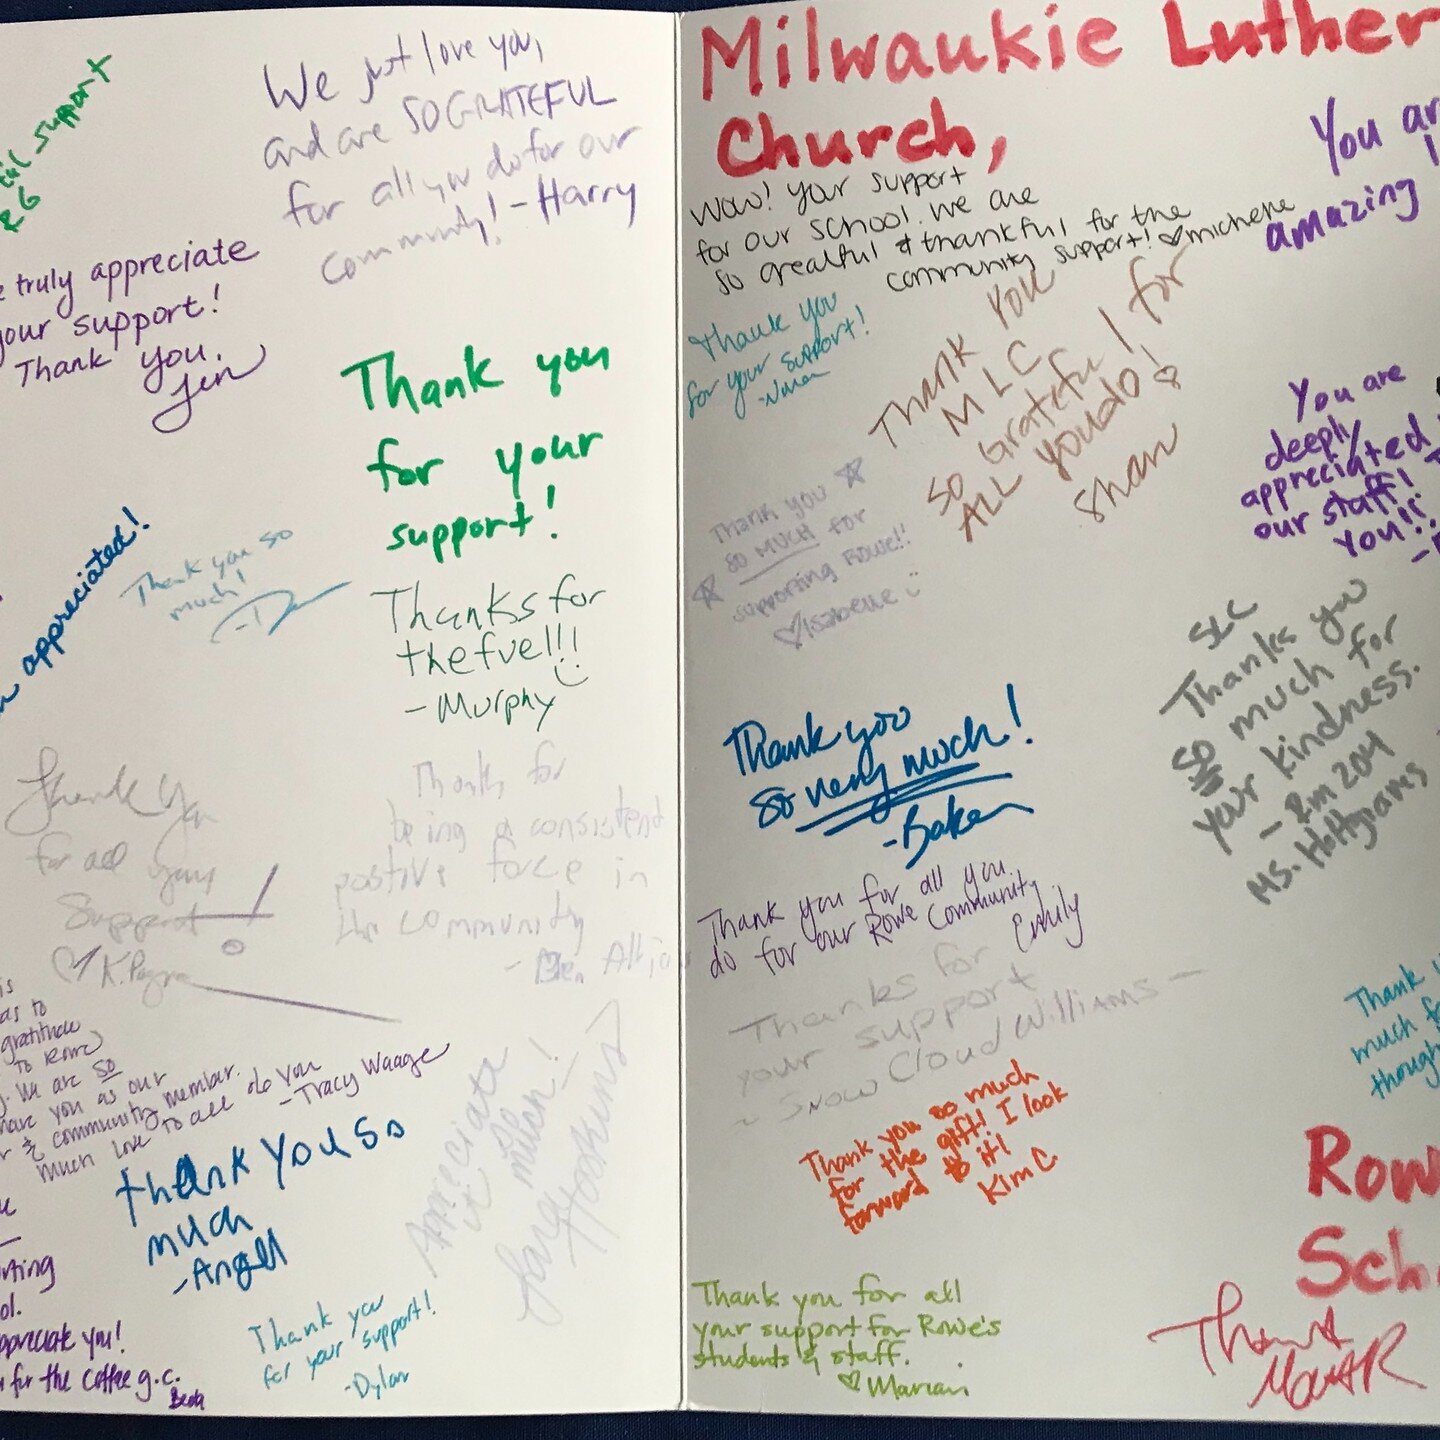 A beautiful thank you card from the @rms_shamrocks staff. 🙂 You are more than welcome! We are honored and happy to help in any way possible. #lutherans #giving #community #fellowship